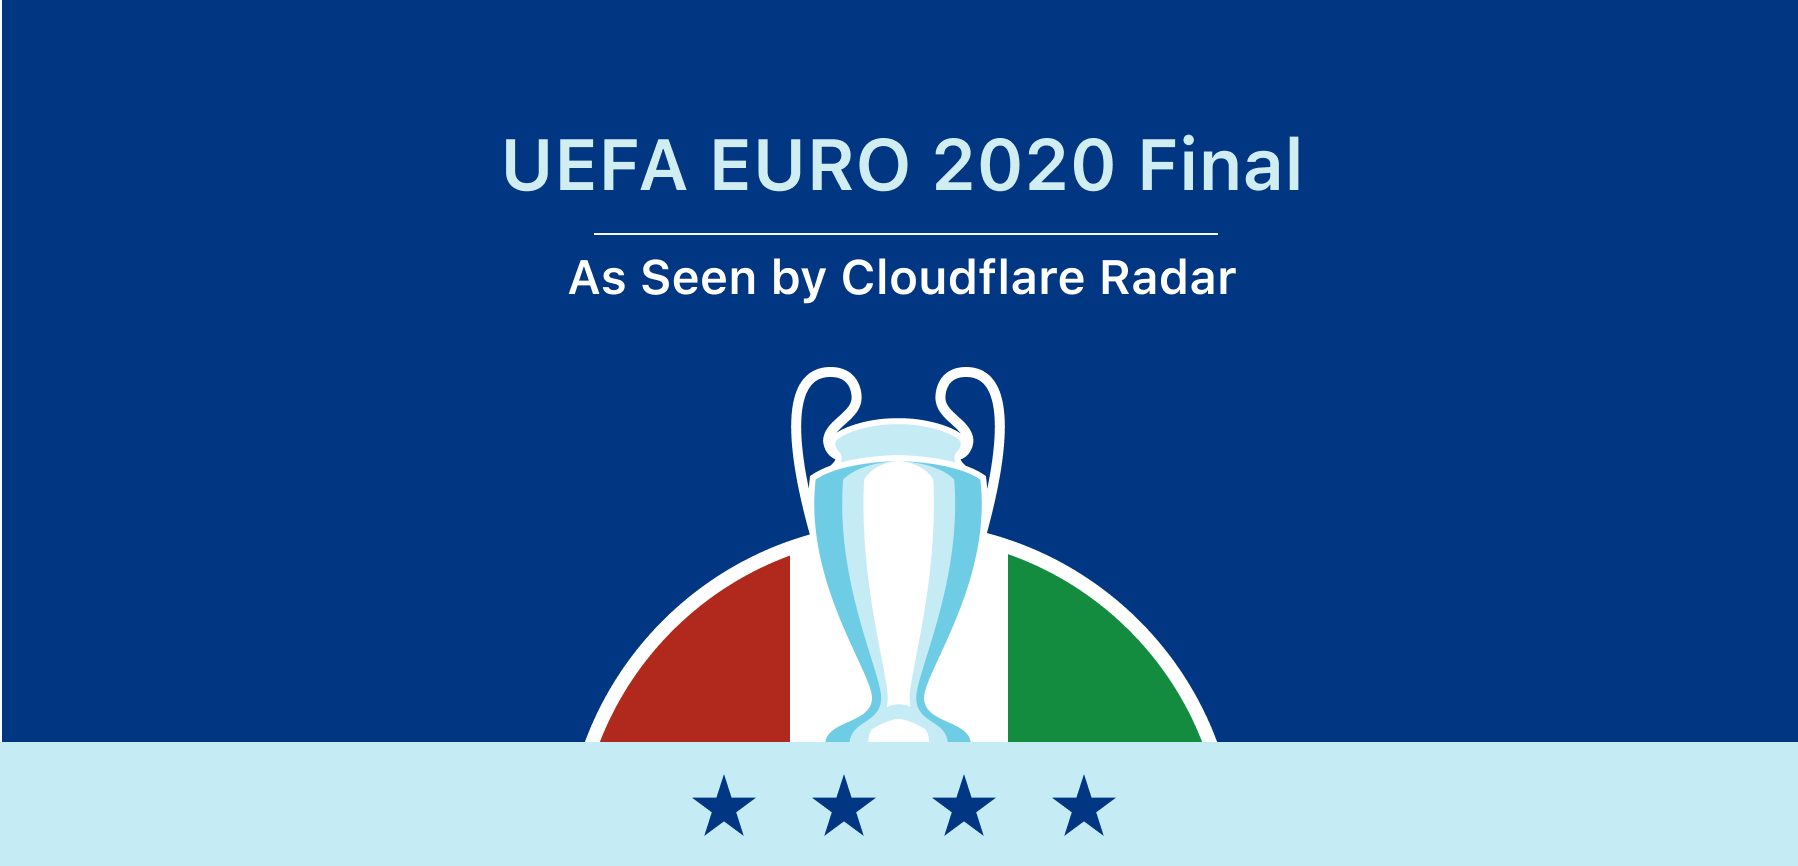 The UEFA EURO 2020 final as seen online by Cloudflare Radar